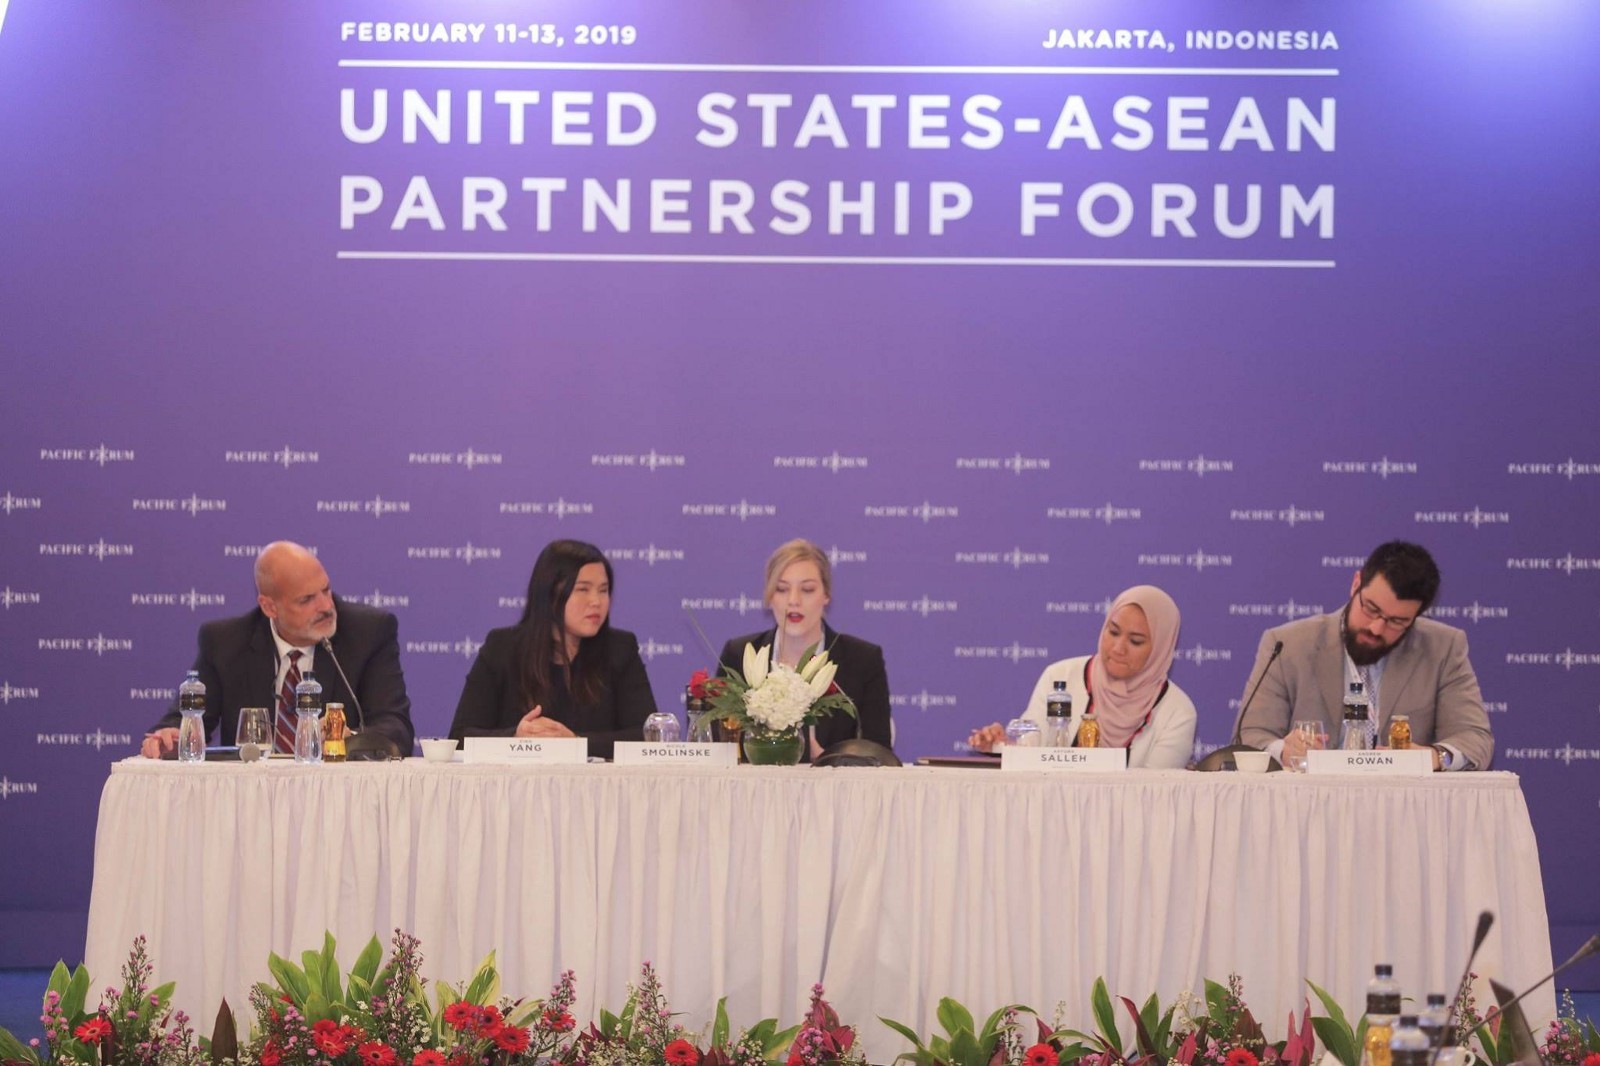 The Young Leaders presenting during the US-ASEAN Partnership Forum. Photo: Pacific Forum